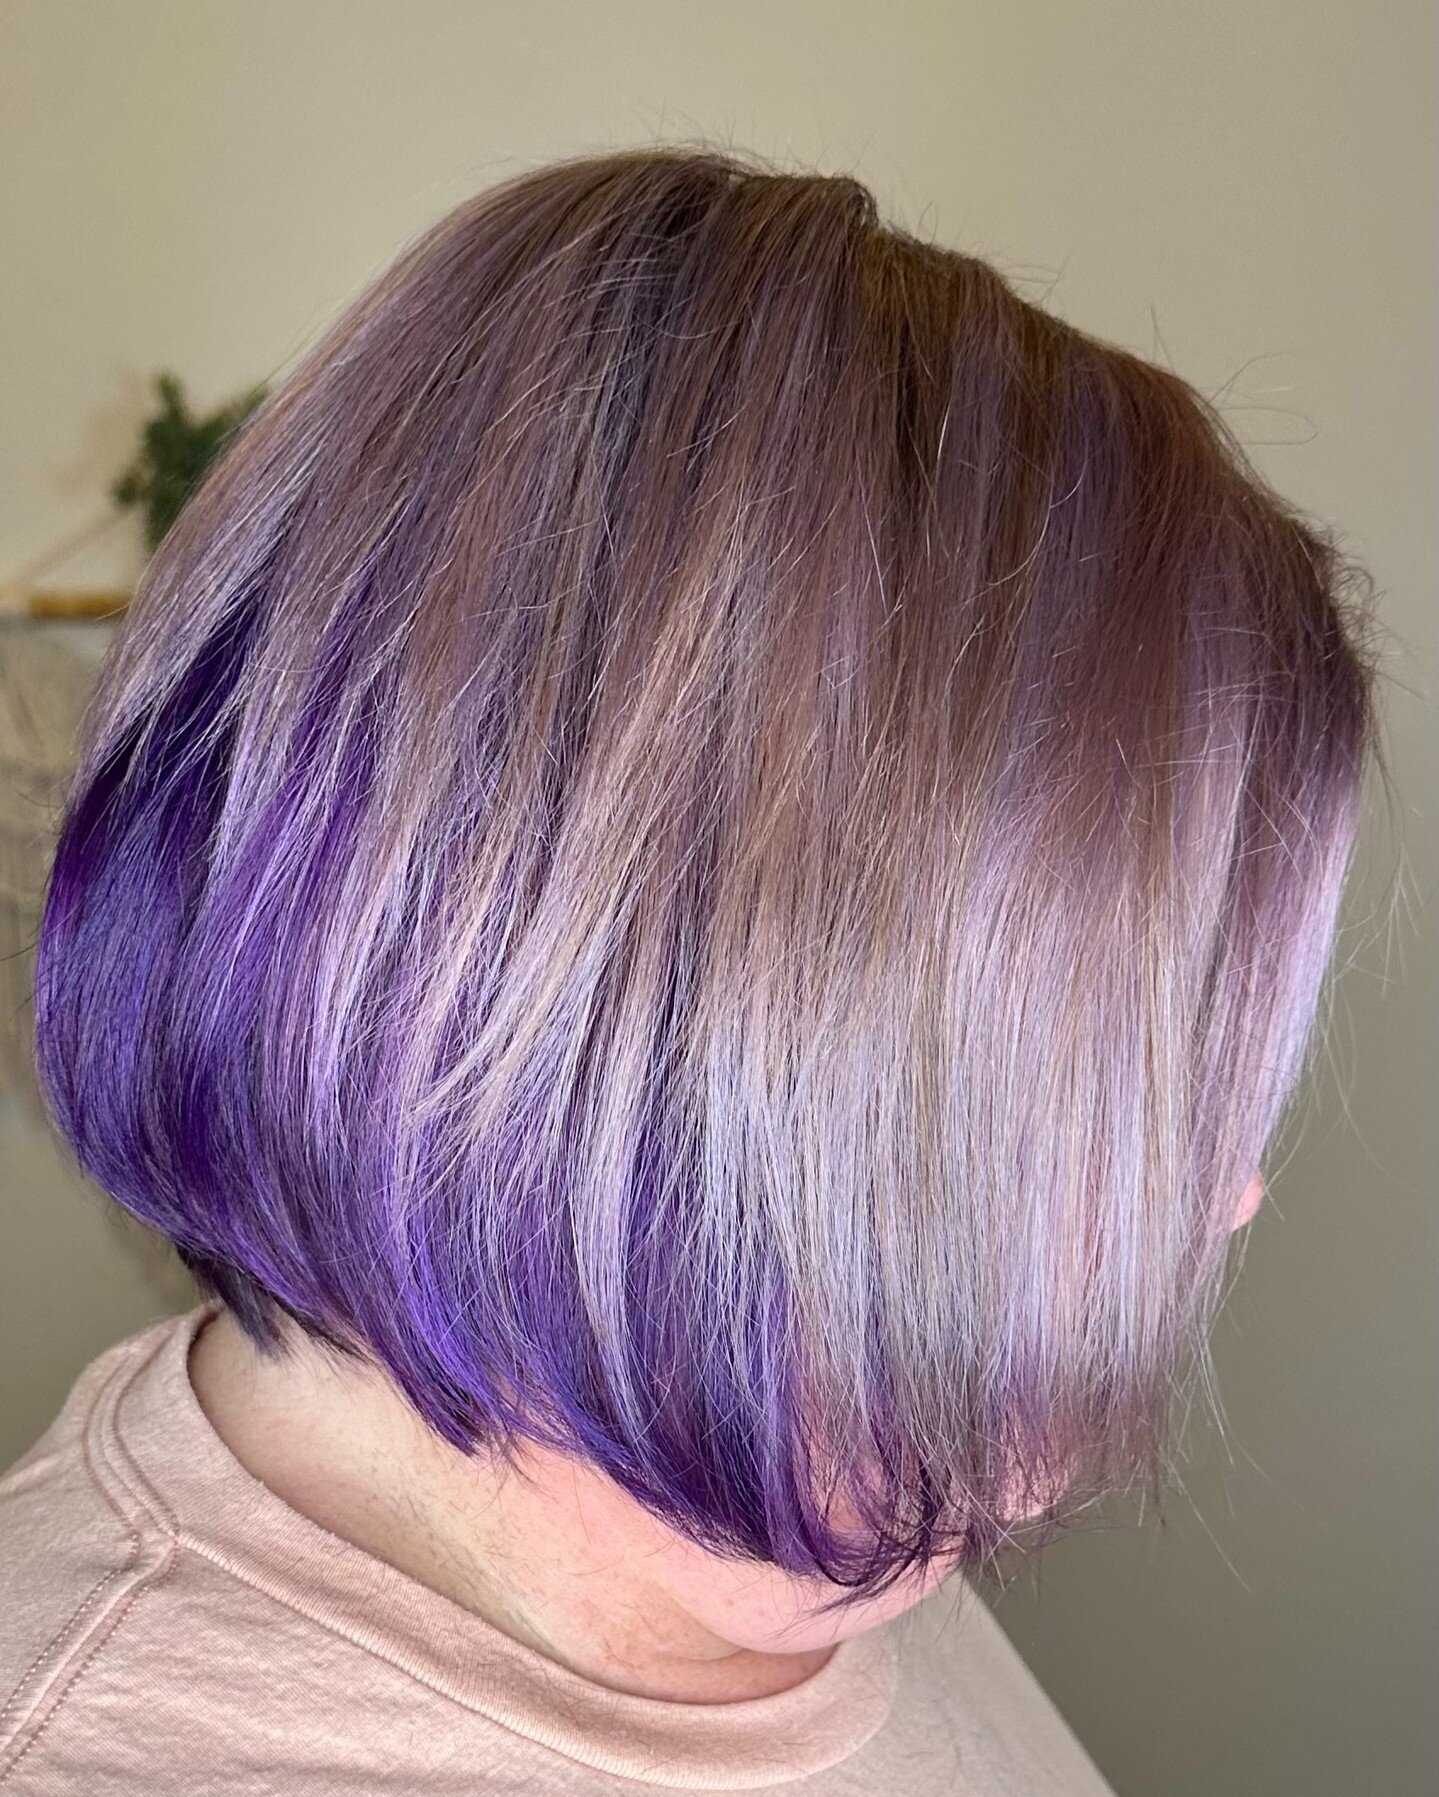 Purple is 💜clearly💜 reigning supreme in this jaw-dropping cut and color by the fabulous @jenleeatallah. We love that our guest embraces her adventurous side with these bold and vibrant tones that scream confidence and individuality 💇&zwj;♀️

#purp